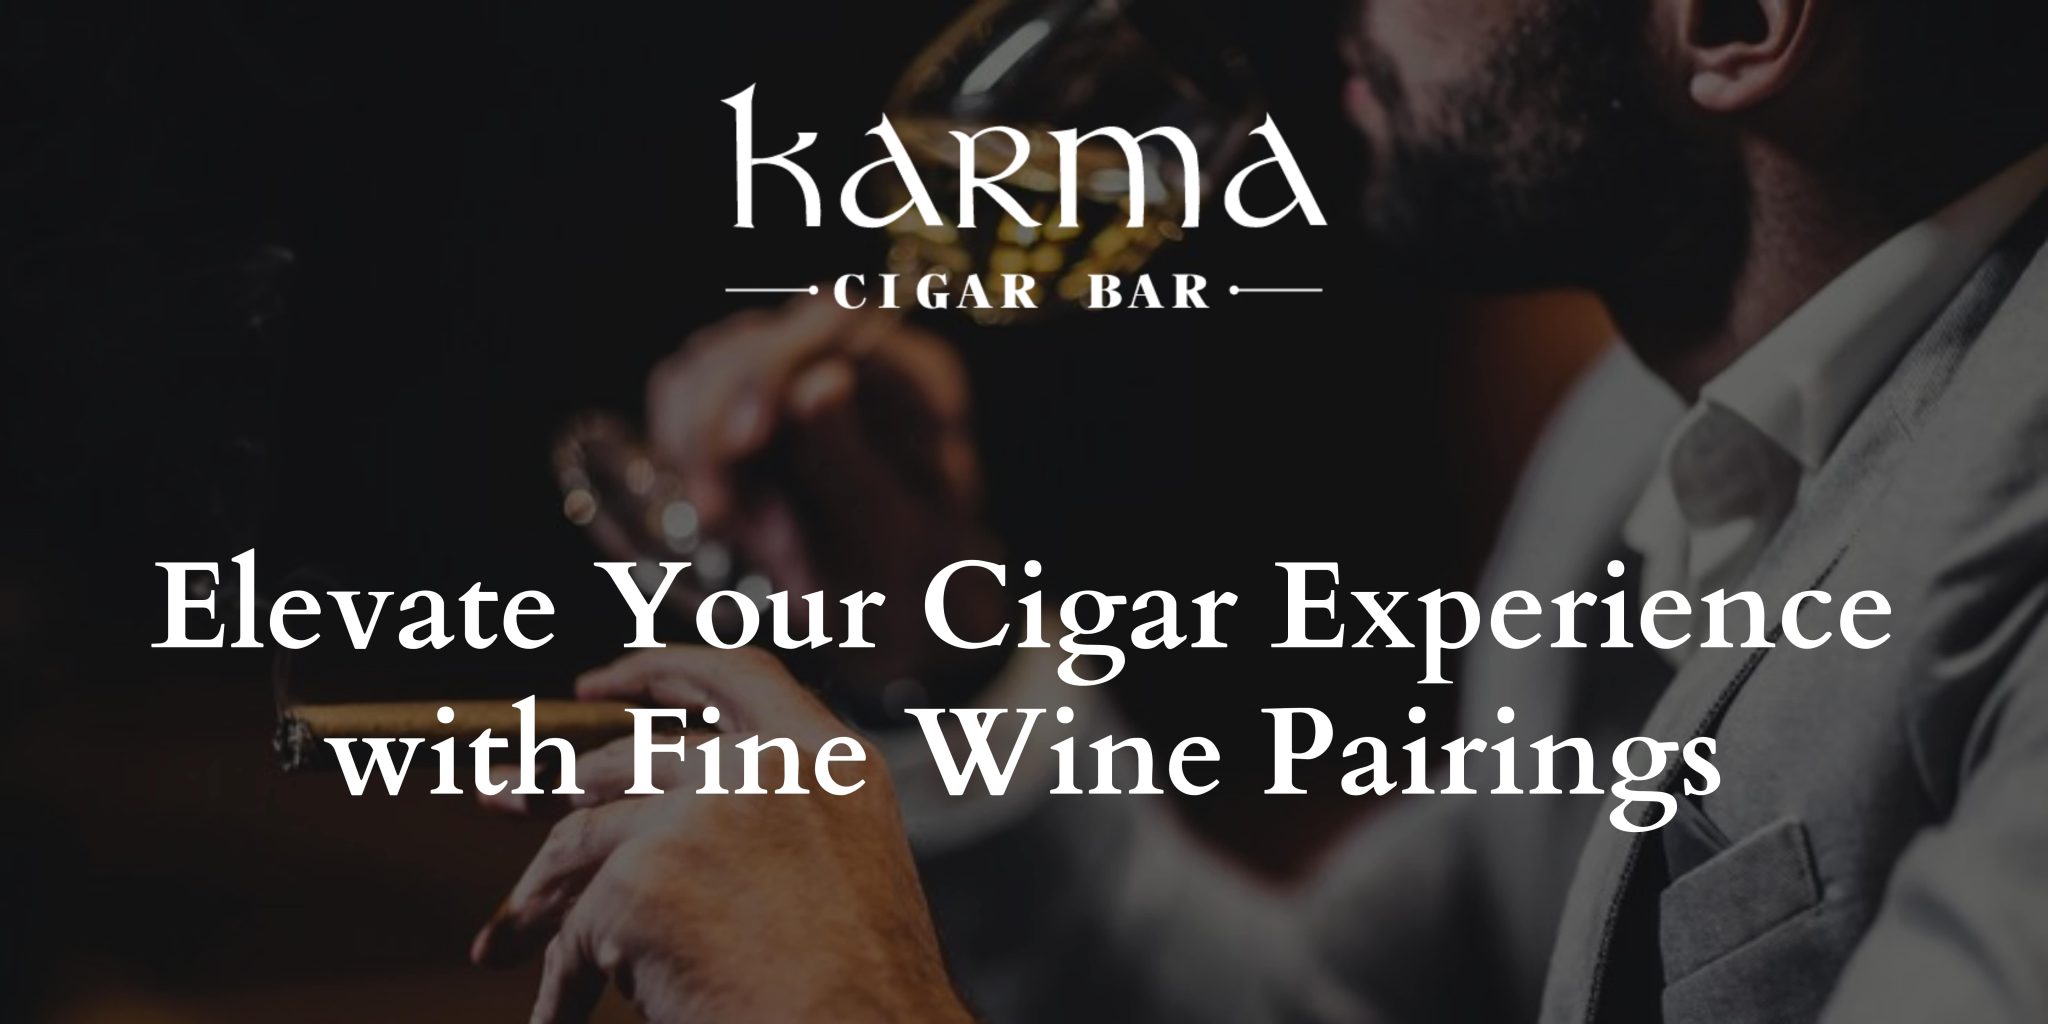 Elevate your cigar experience with fine wine pairings